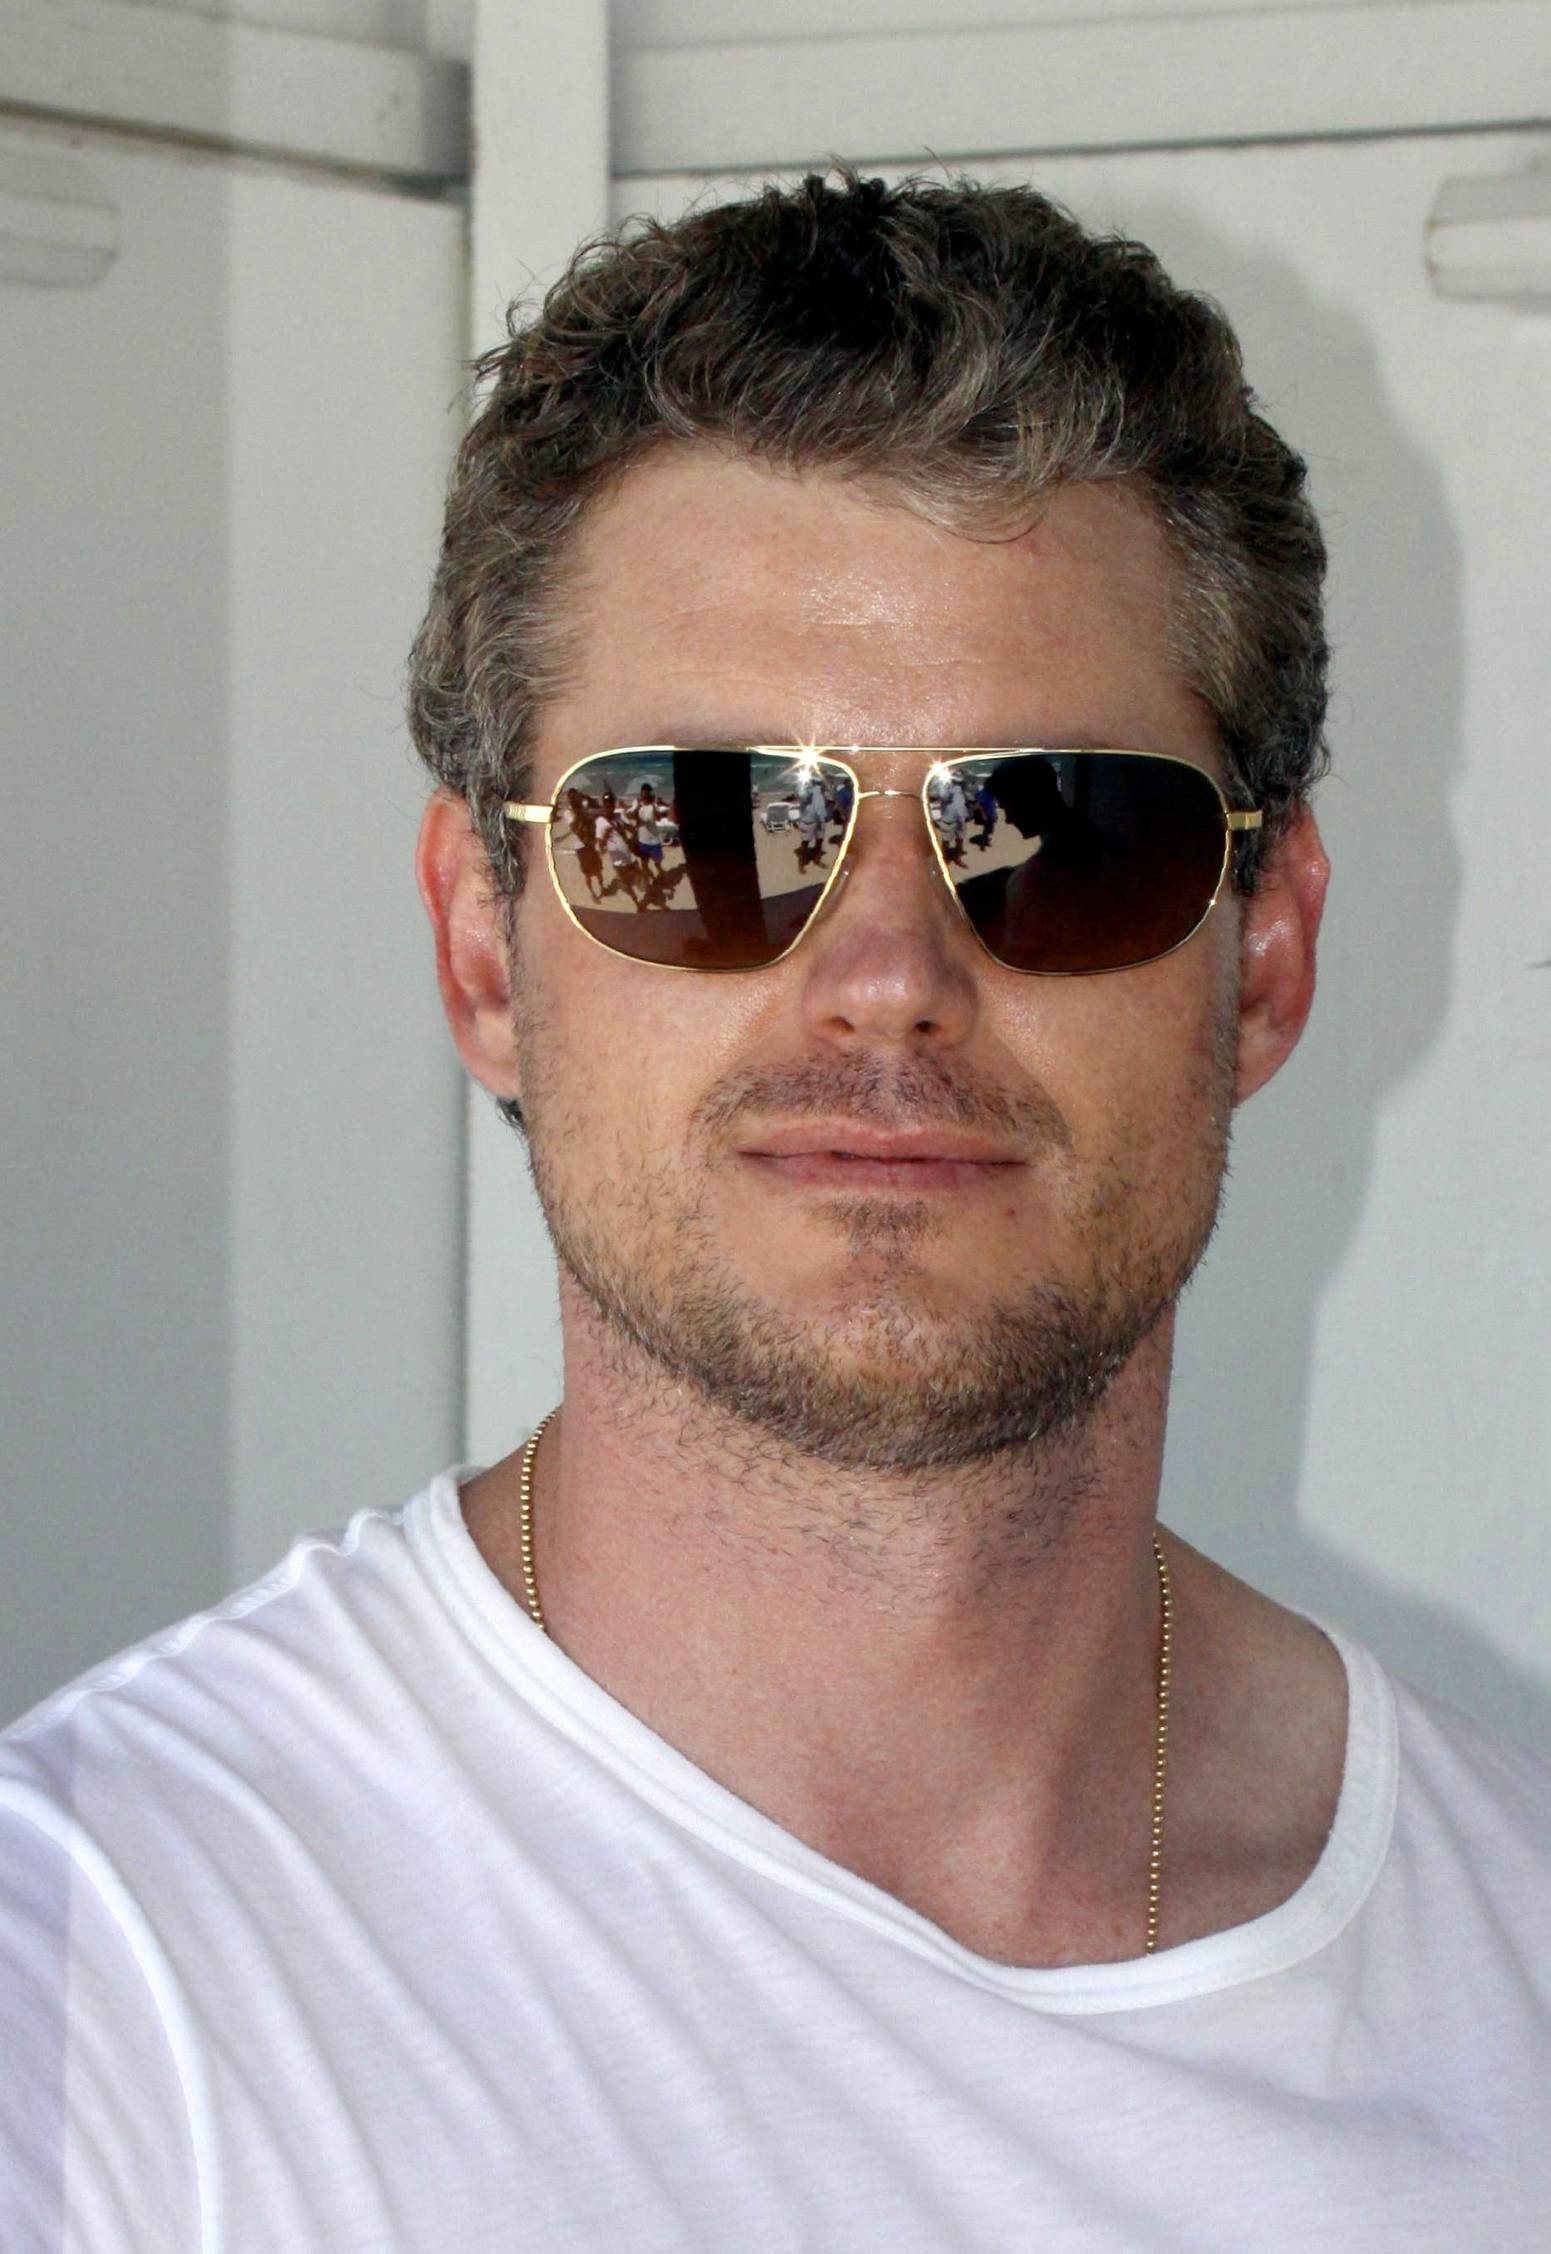 To The Eric Dane Wallpaper Just Right Click On Image And